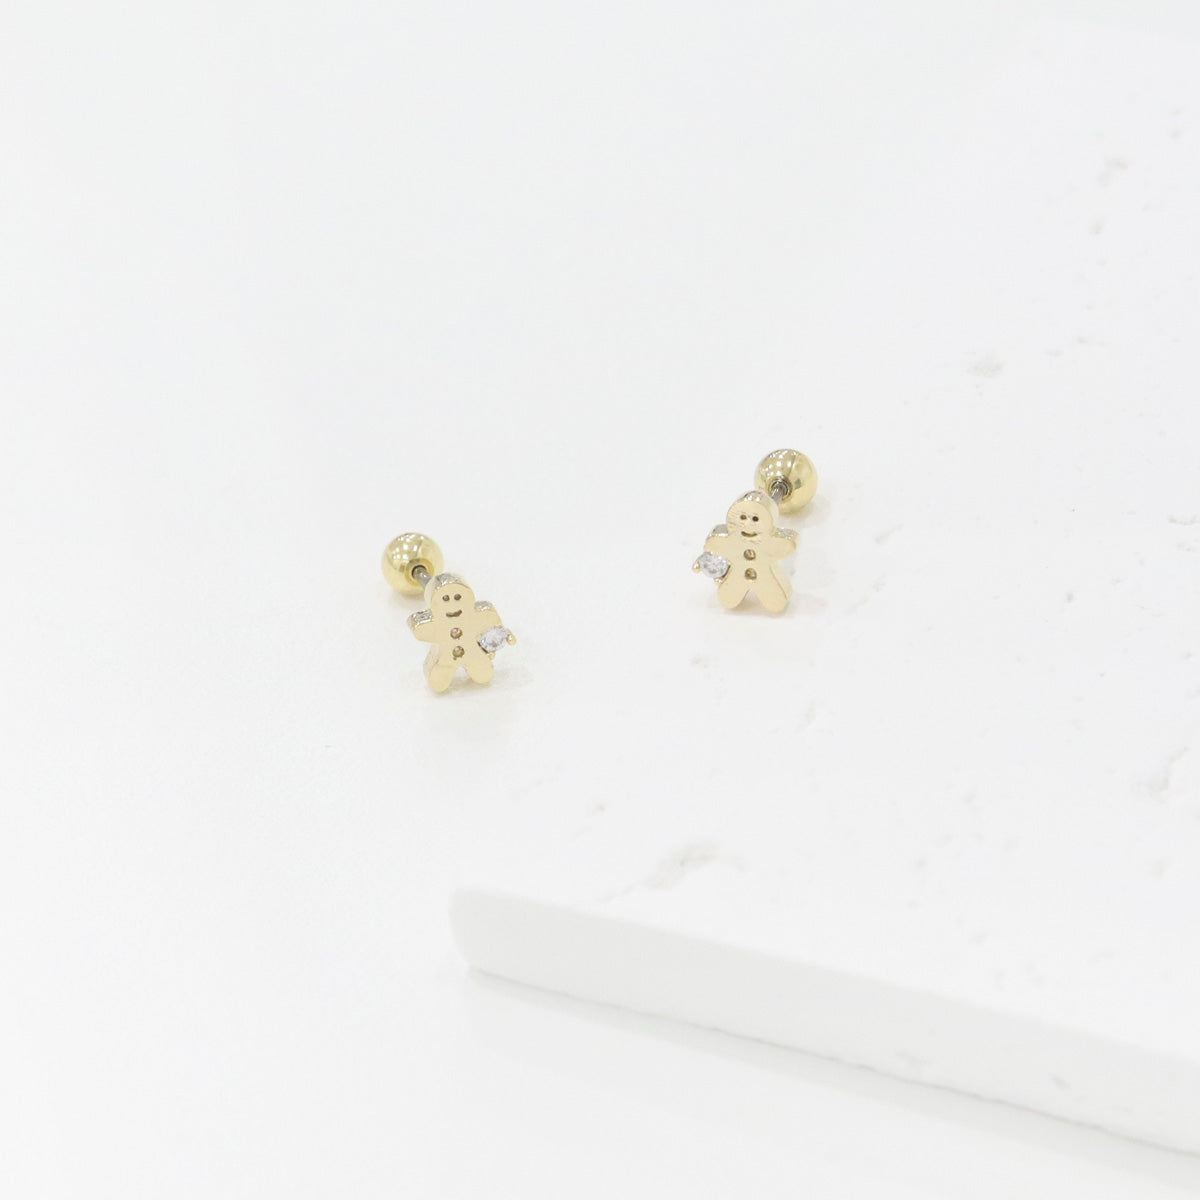 Tiny The Gingerman bread cubic point Surgical Steel screw back ball Cartilage earrings, Barbells Ear Piercing, Cartilage Piercing